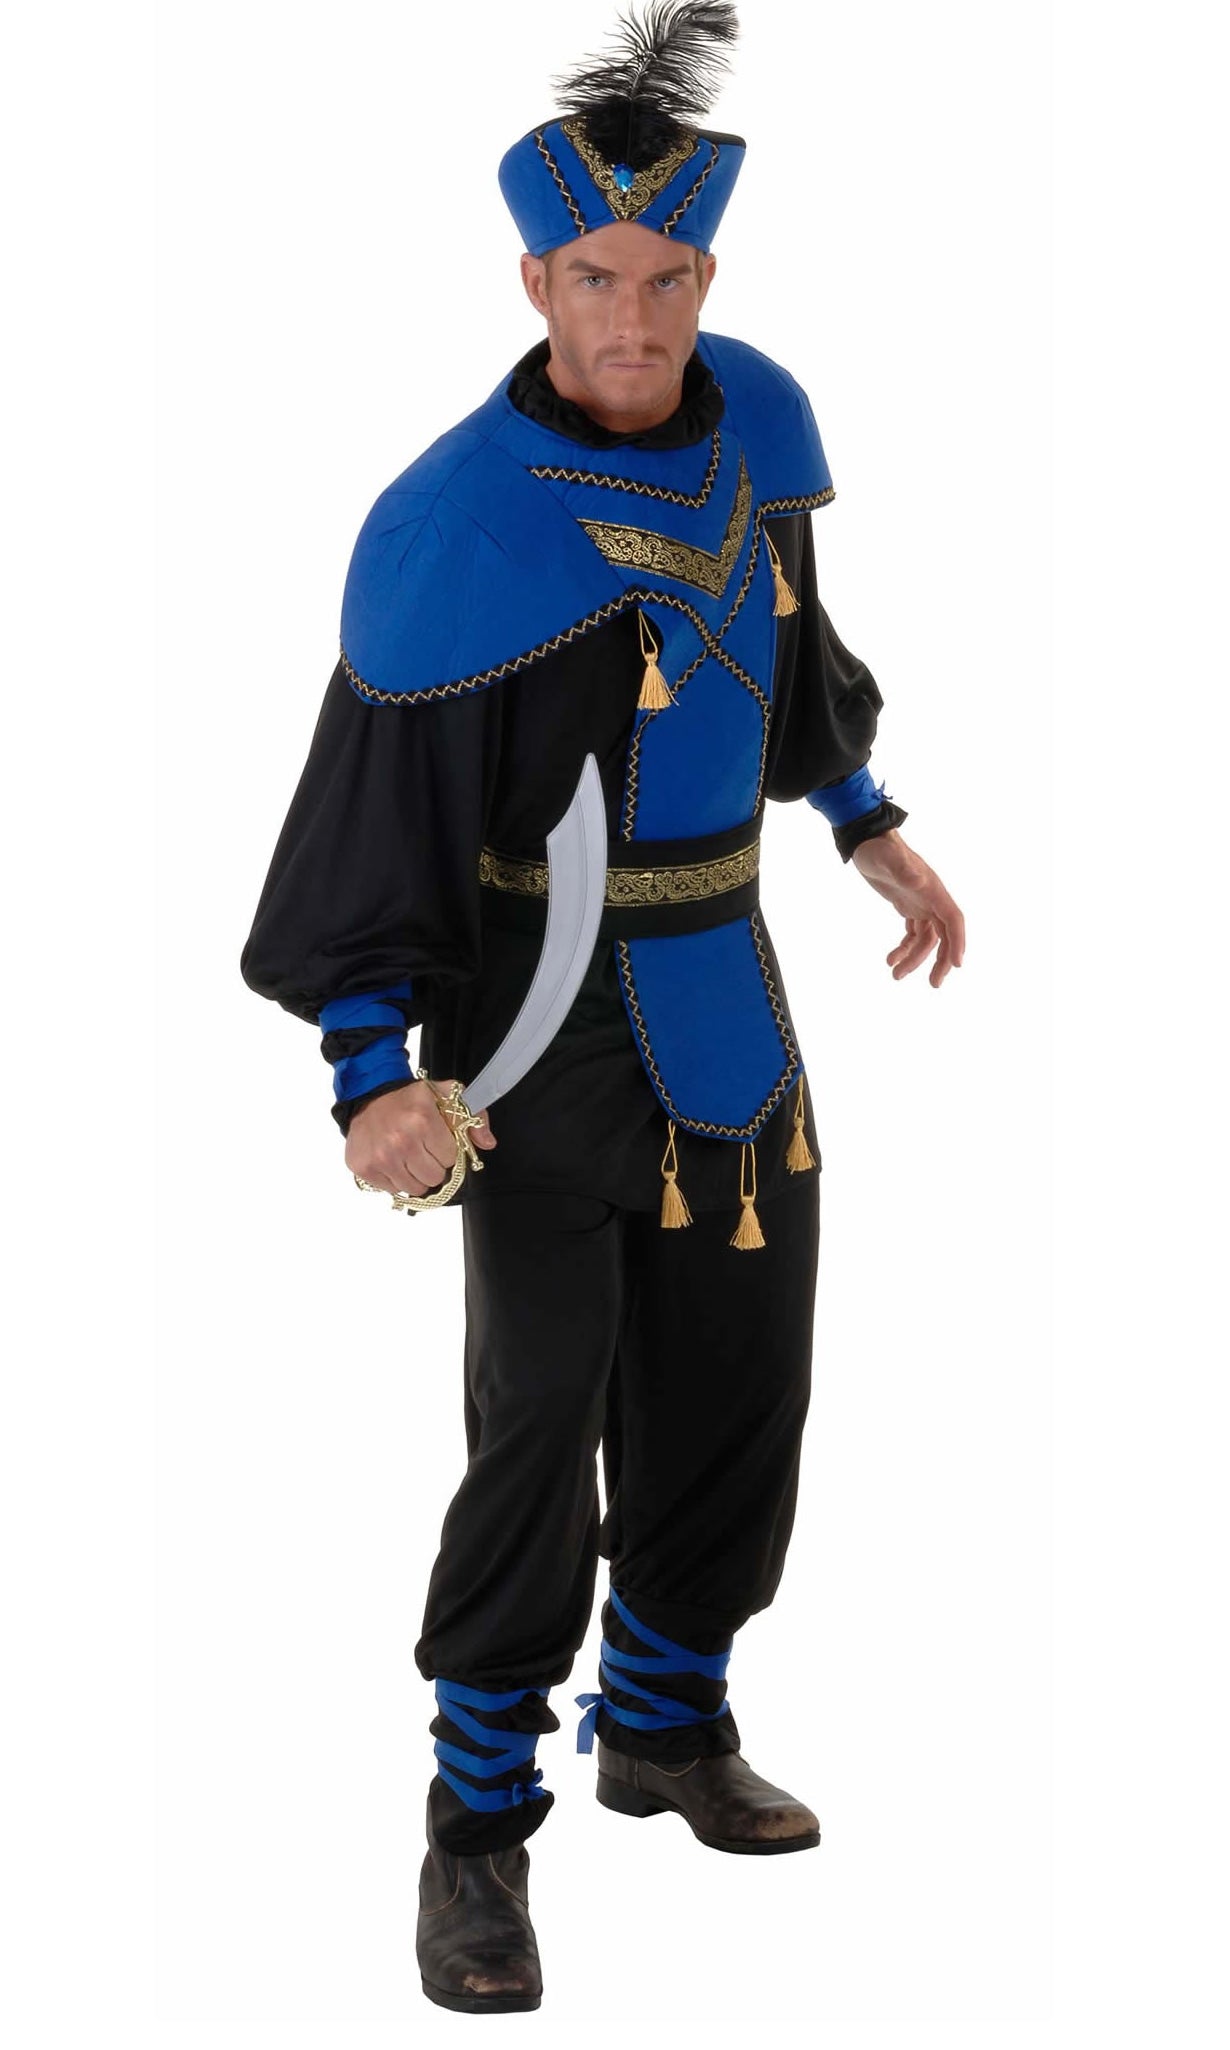 Side angle of men's Arabian style costume in blue and black with hat